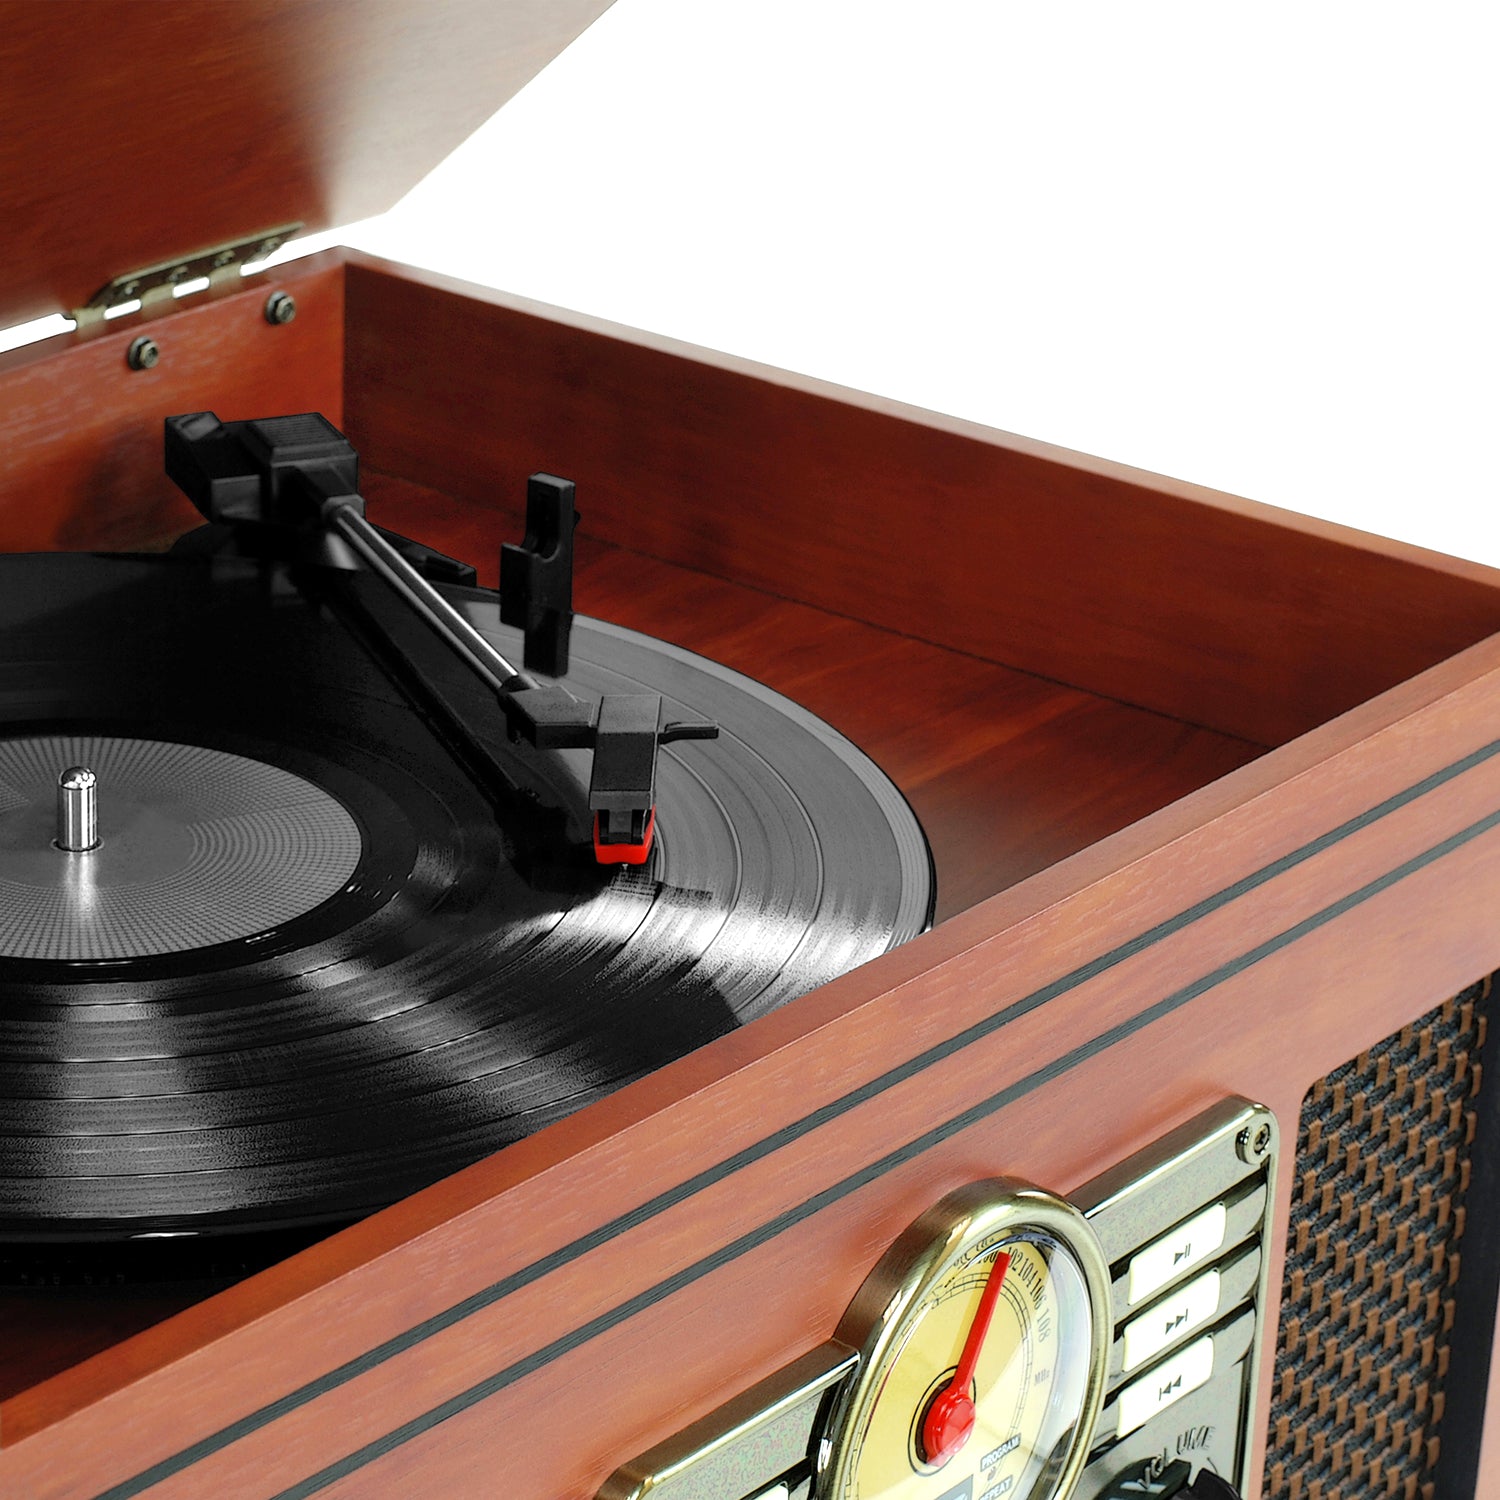 6 in 1 Record Player With Bluetooth  Nostalgic Record Player – Victrola